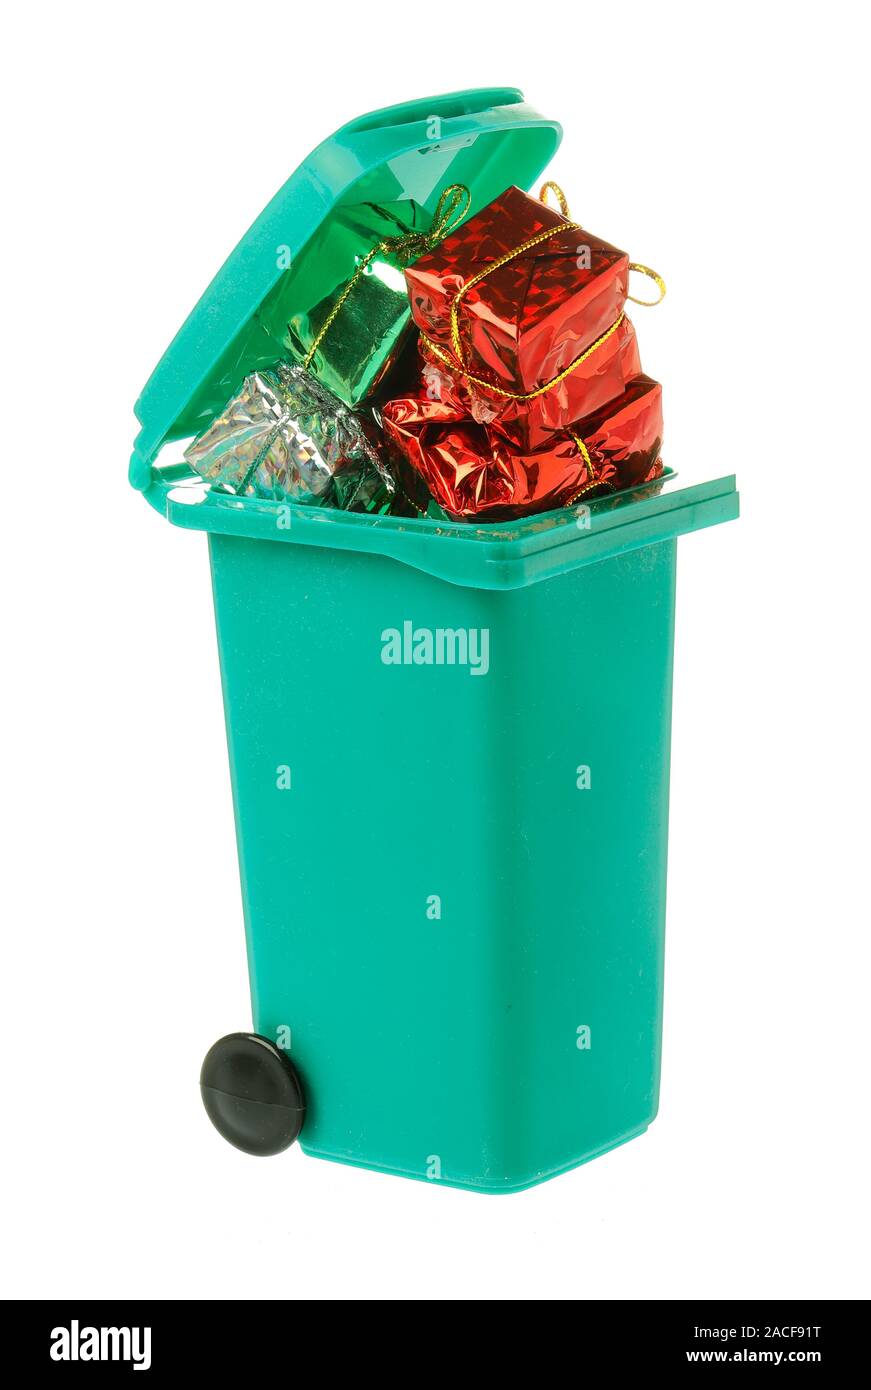 https://c8.alamy.com/comp/2ACF91T/a-green-garbage-bin-filled-with-wasted-wrapped-gift-boxes-isolated-on-white-background-2ACF91T.jpg